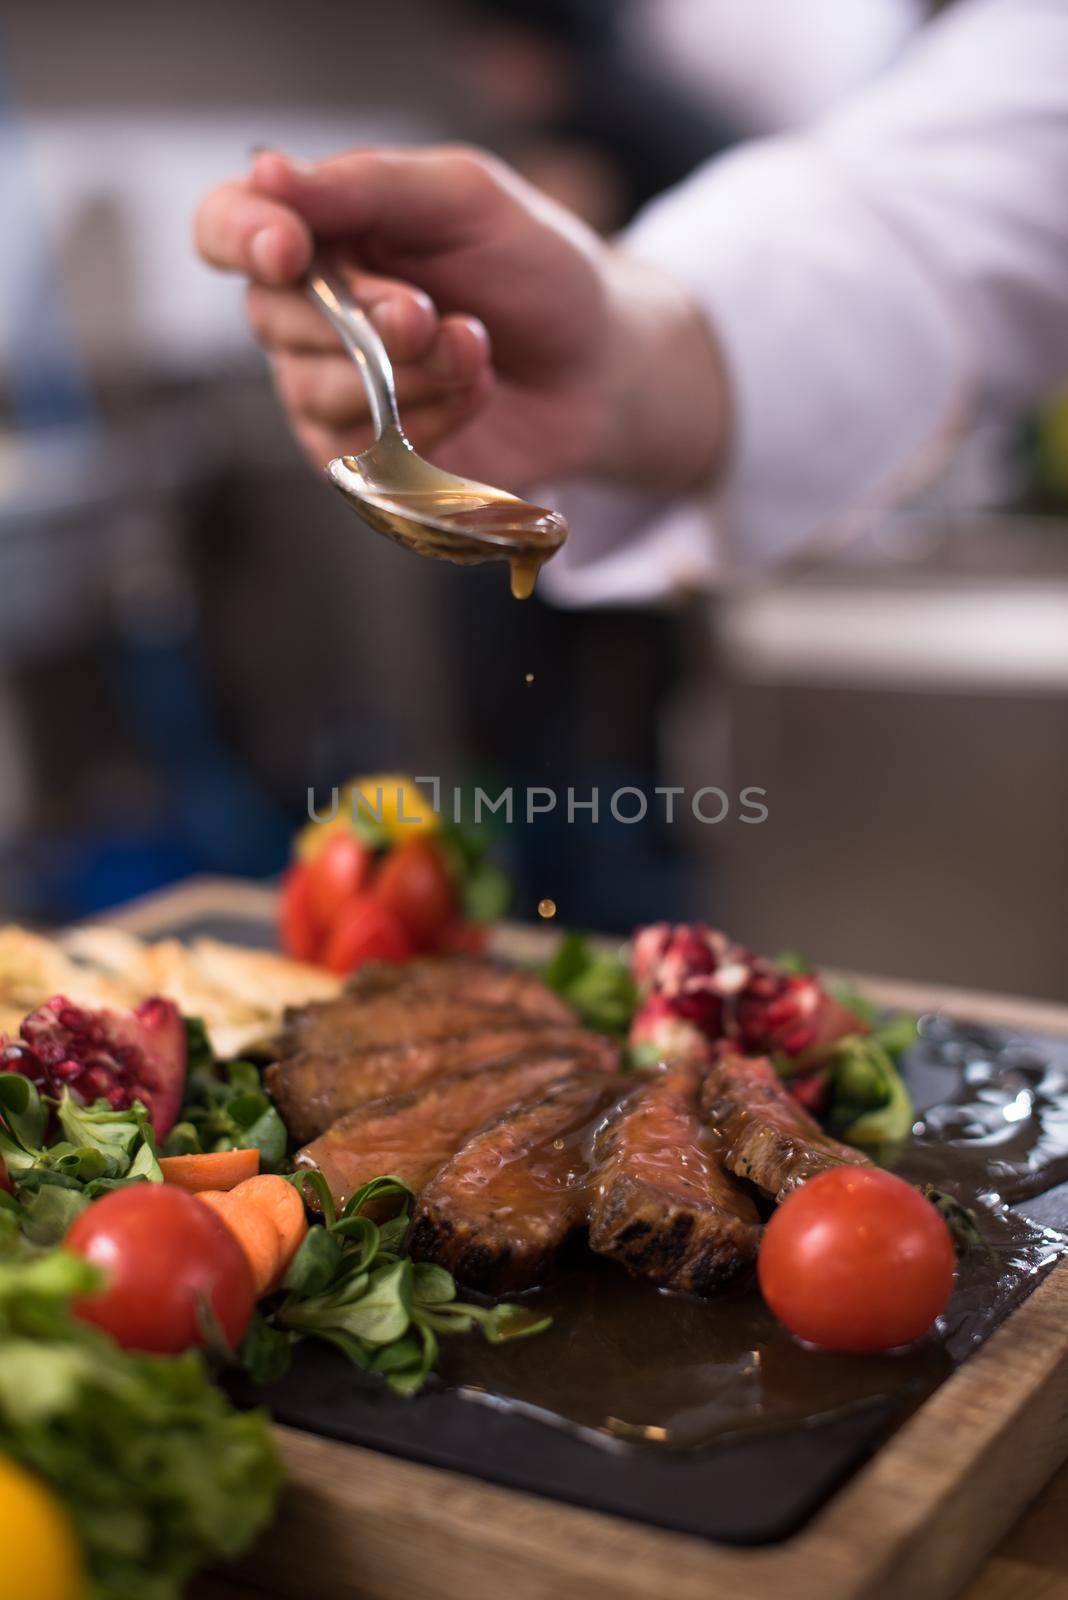 Chef hand finishing steak meat plate by dotshock